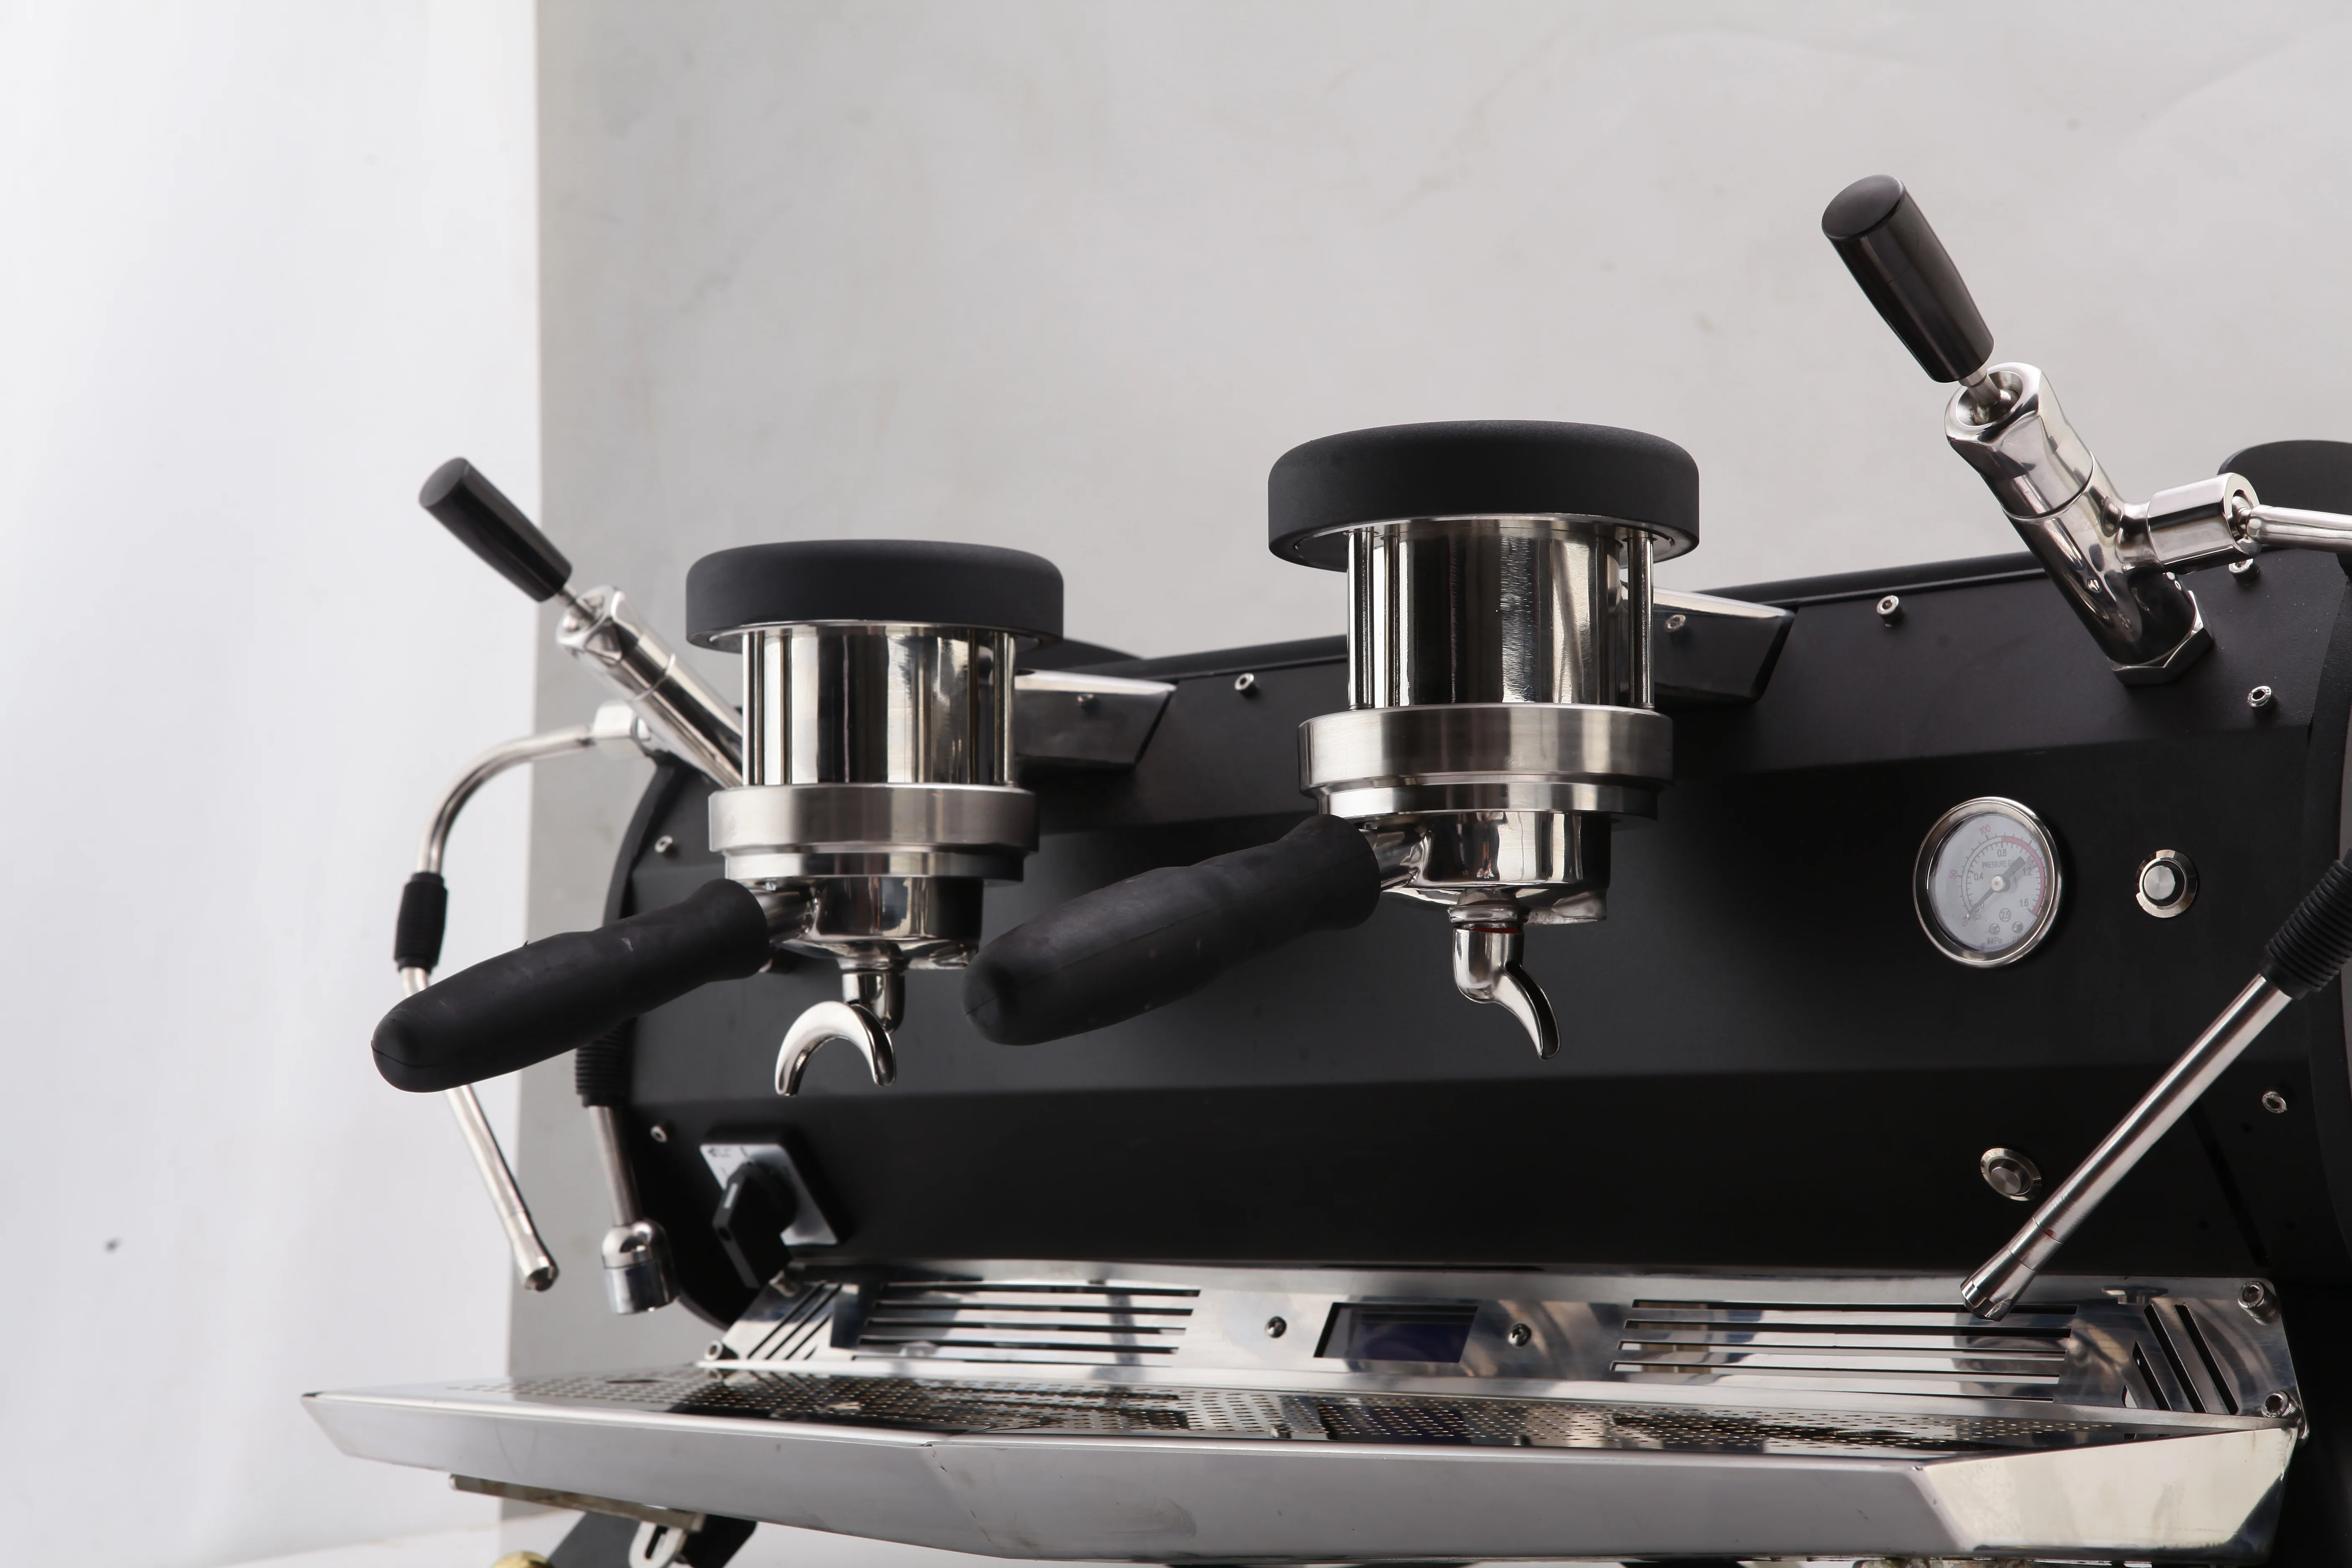 
Stainless steel two brewing head commercial use espresso coffee machine /Italian coffee maker 